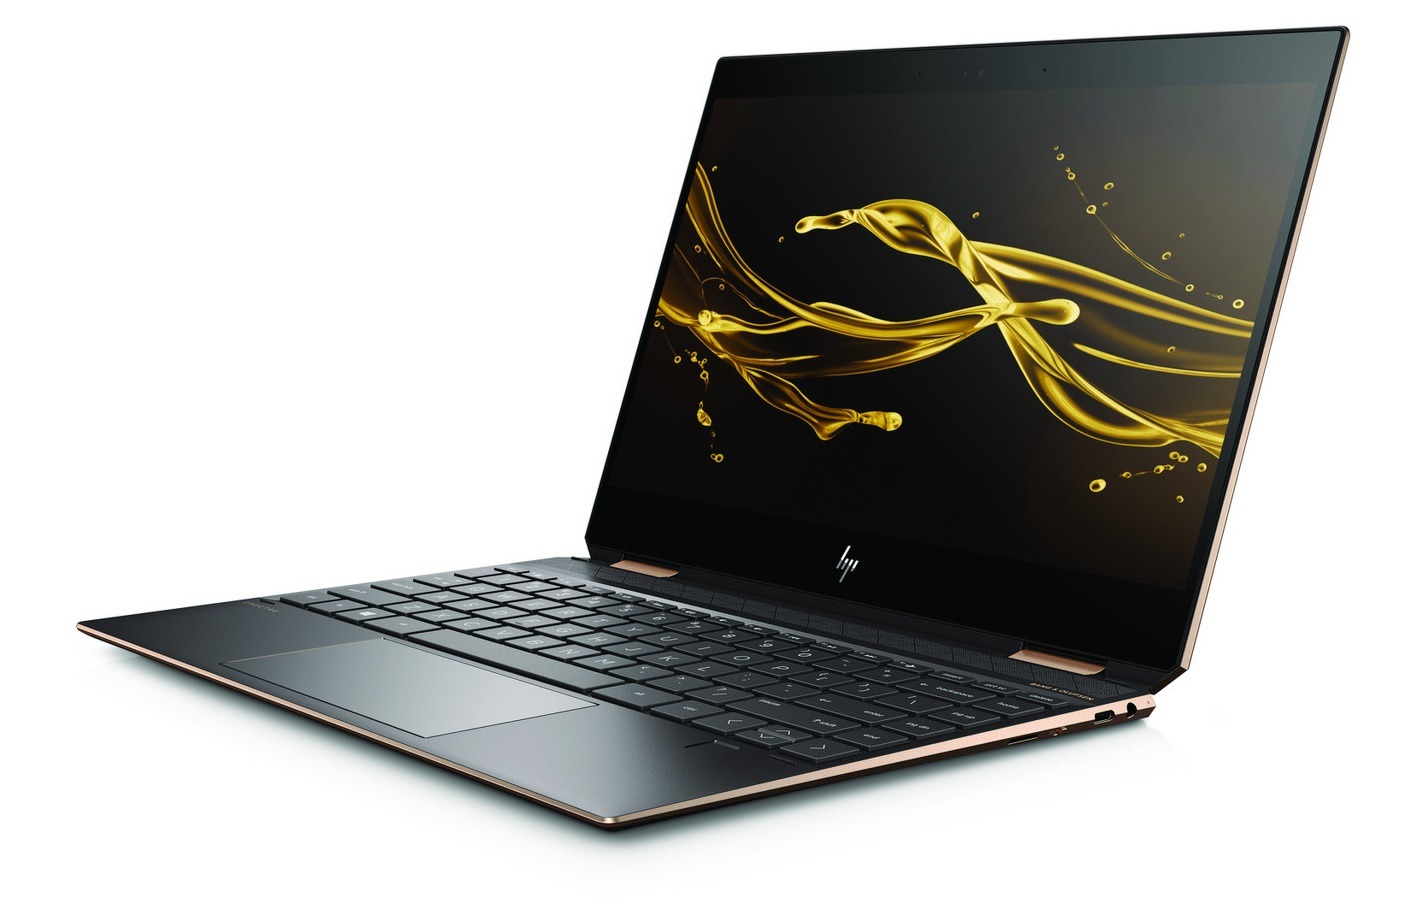 HP Spectre x360: Erstes 15-Zoll Notebook mit AMOLED-Display